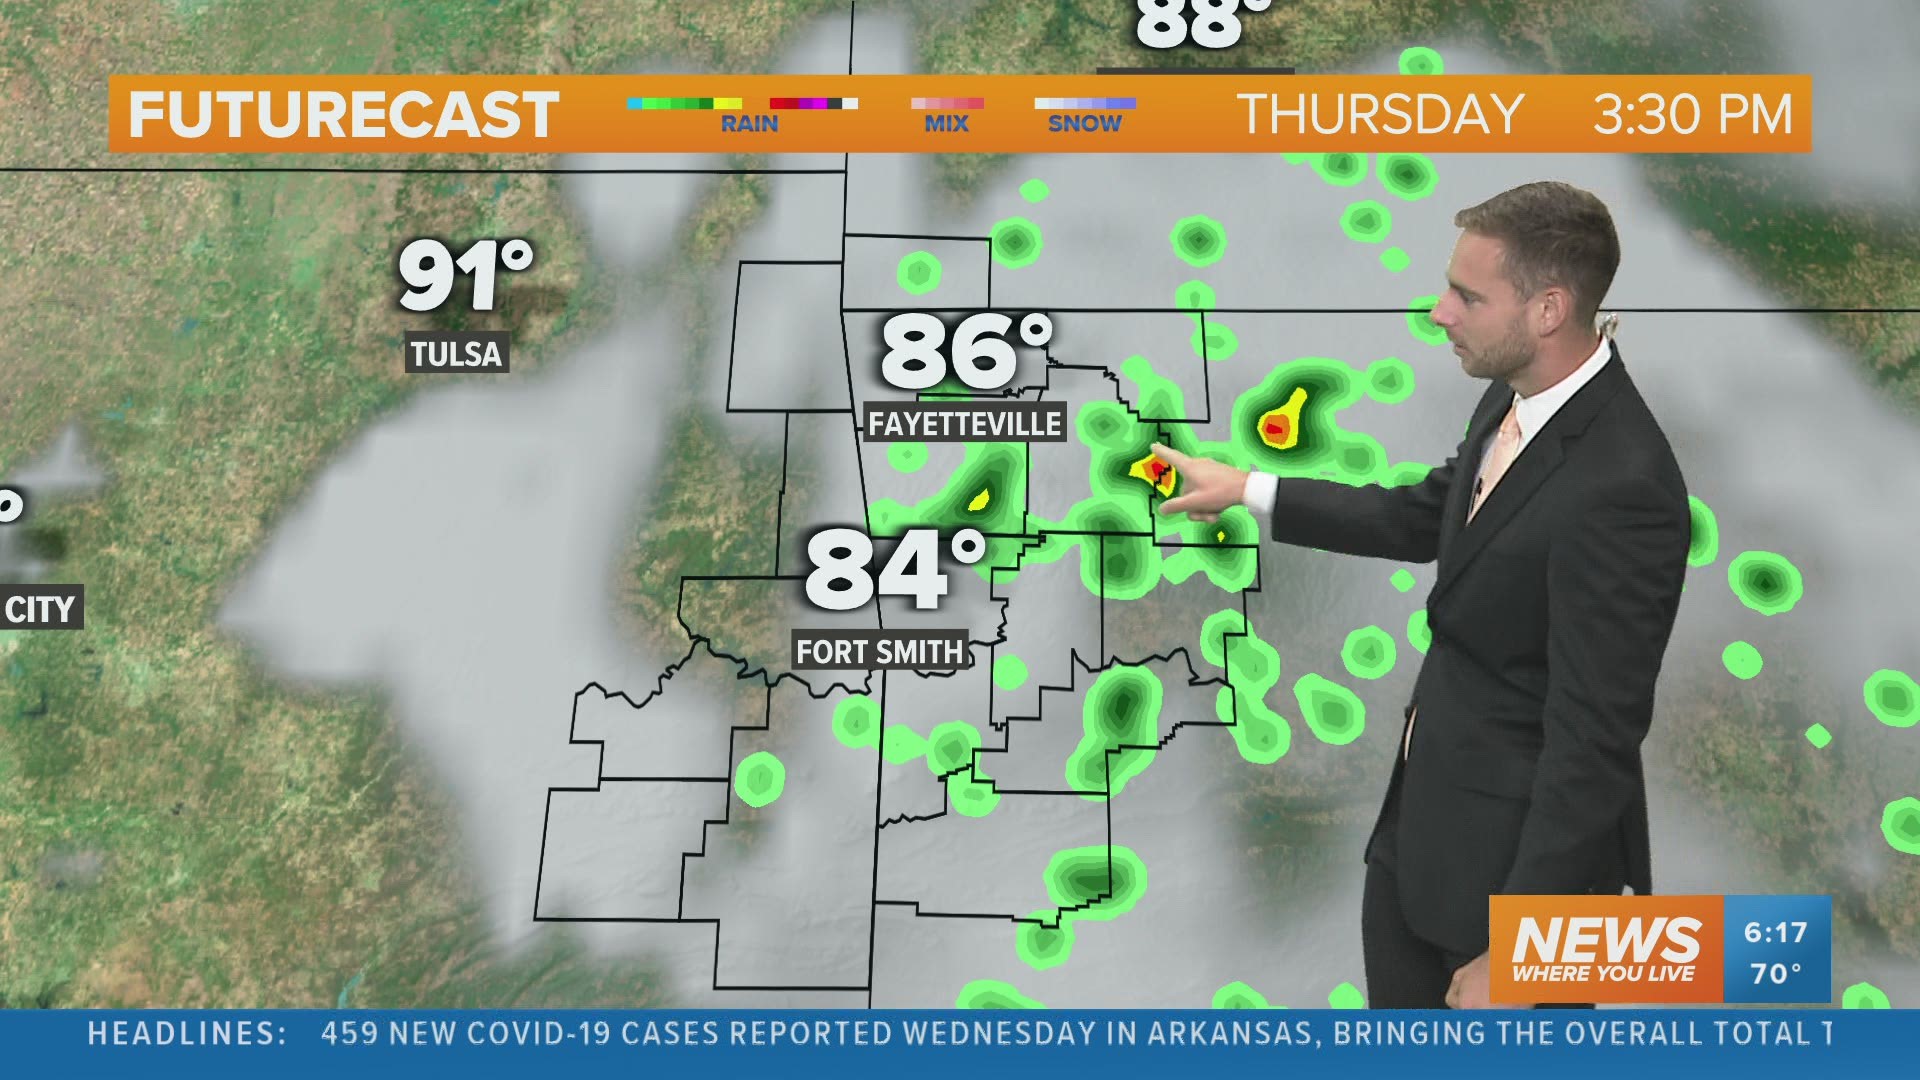 Isolated afternoon showers today